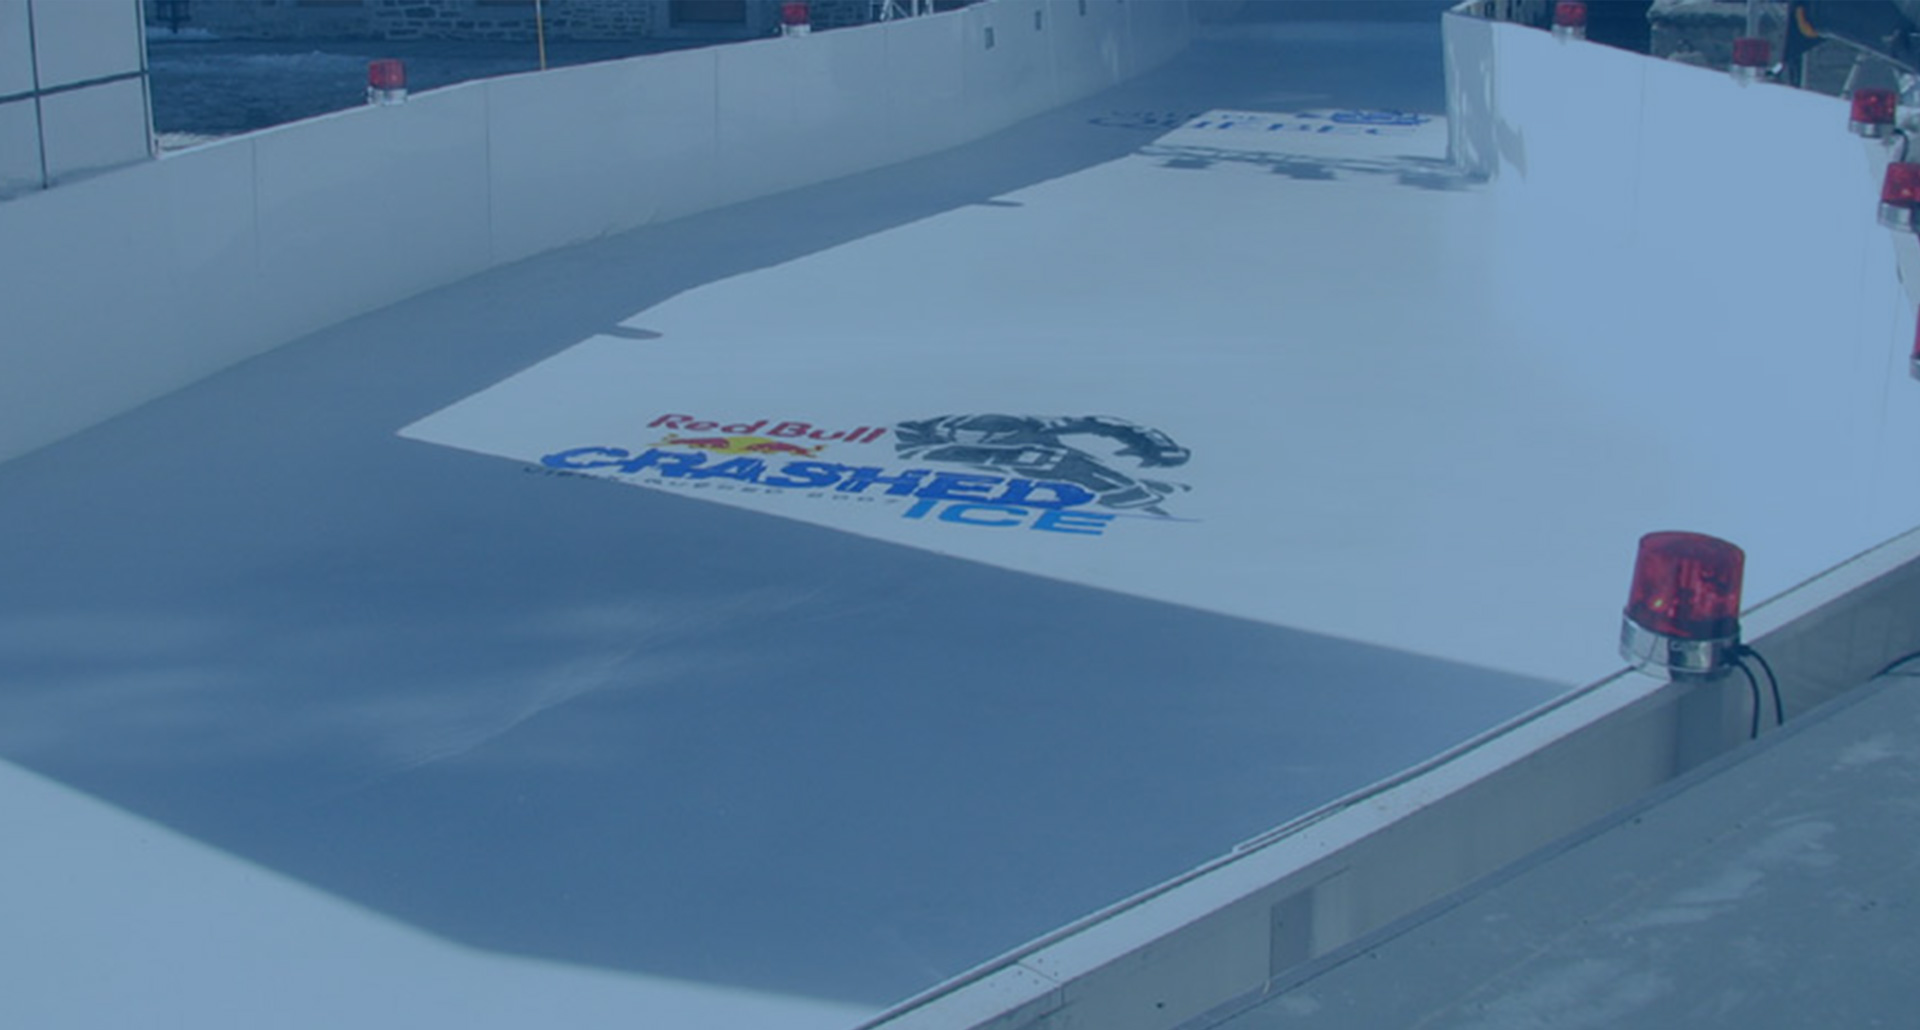 Red bull Crashed Ice Arena